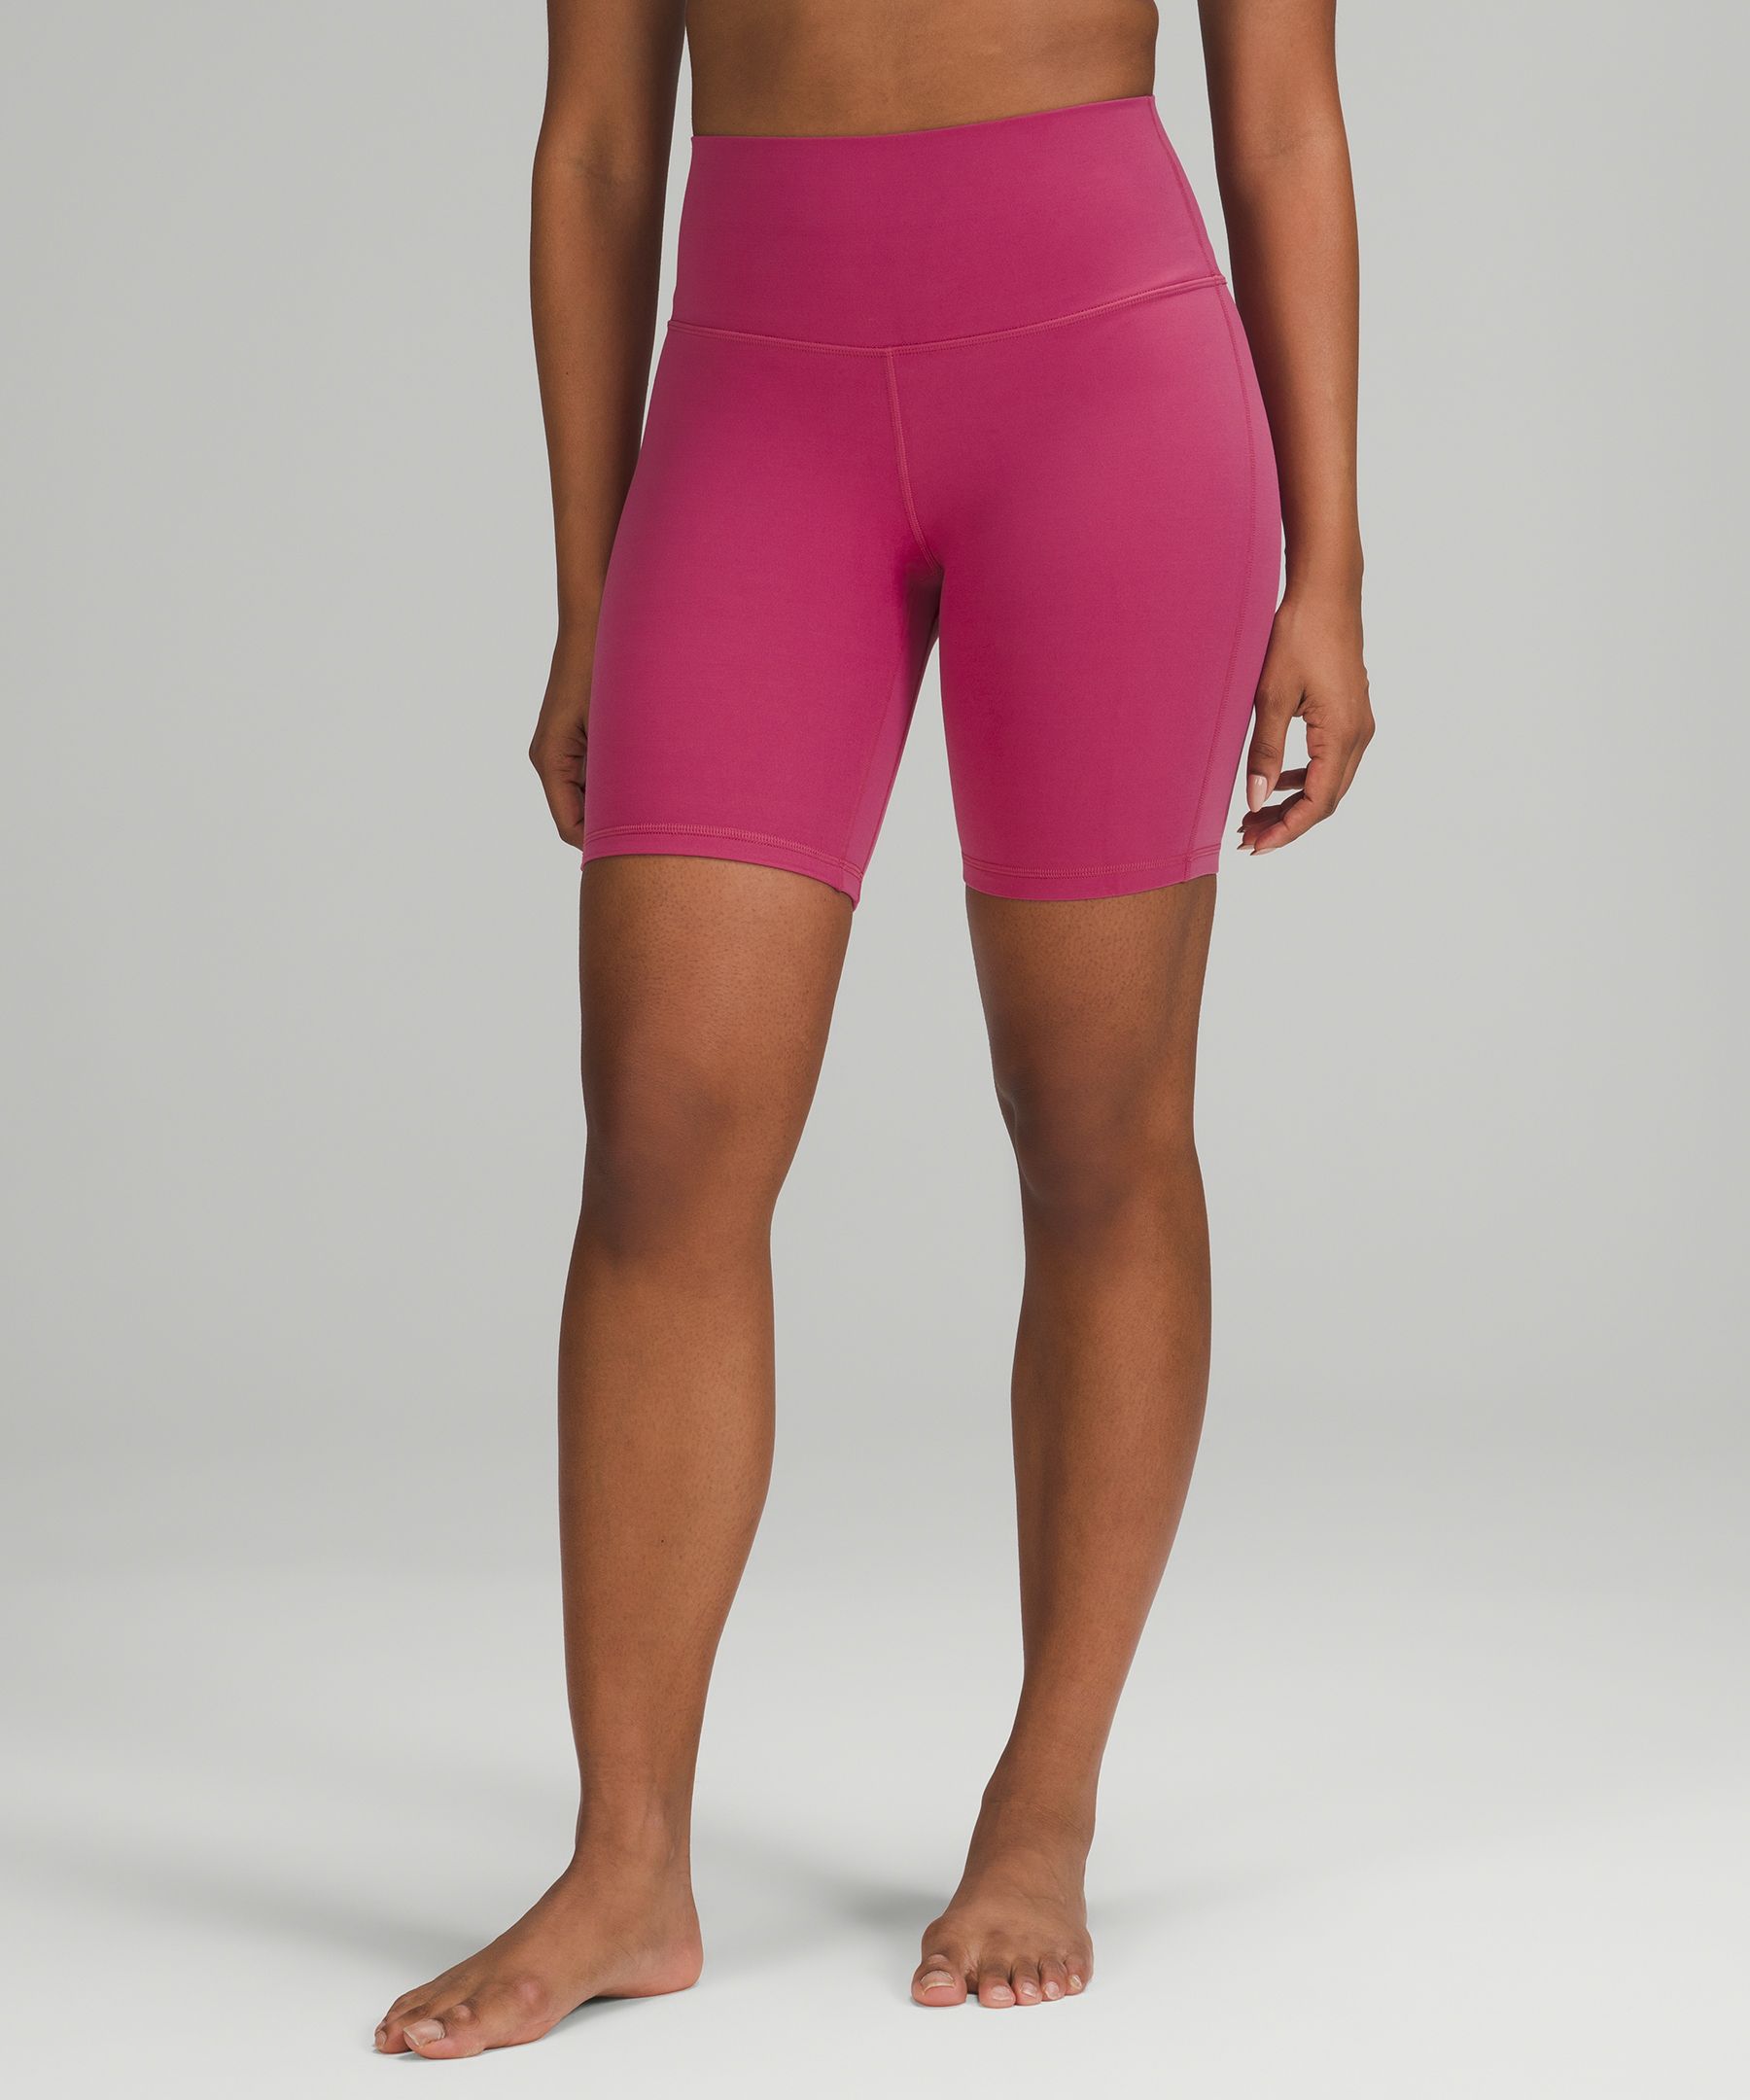 Lululemon Burgundy High Waisted 8 Inch Align Biker Shorts Size 0 - $52 New  With Tags - From Tara